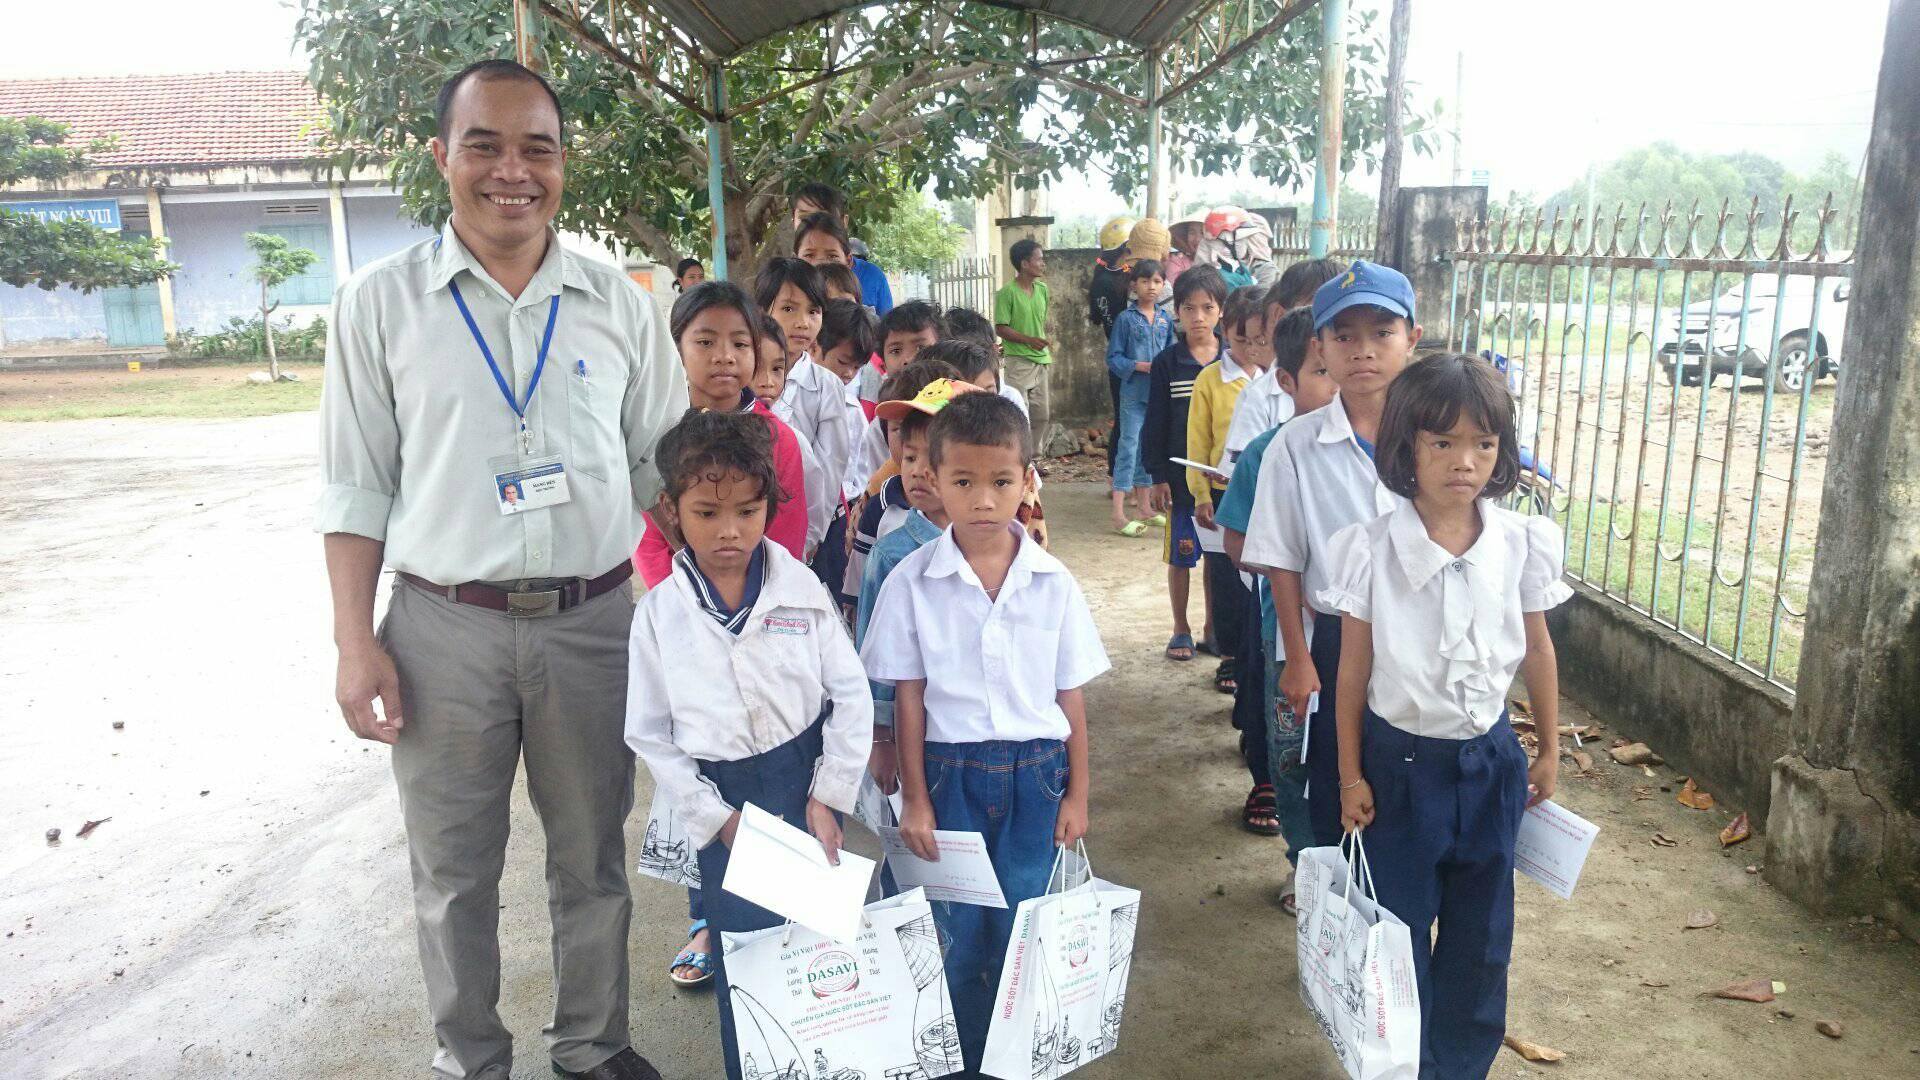 GIVE THE GIFTS FOR POOR PUPIL WHO TRY TO OVERCOME DIFFICULTIES IN CAM THINH TAY 1- CAM RANH - KHANH HOA PROVINCE